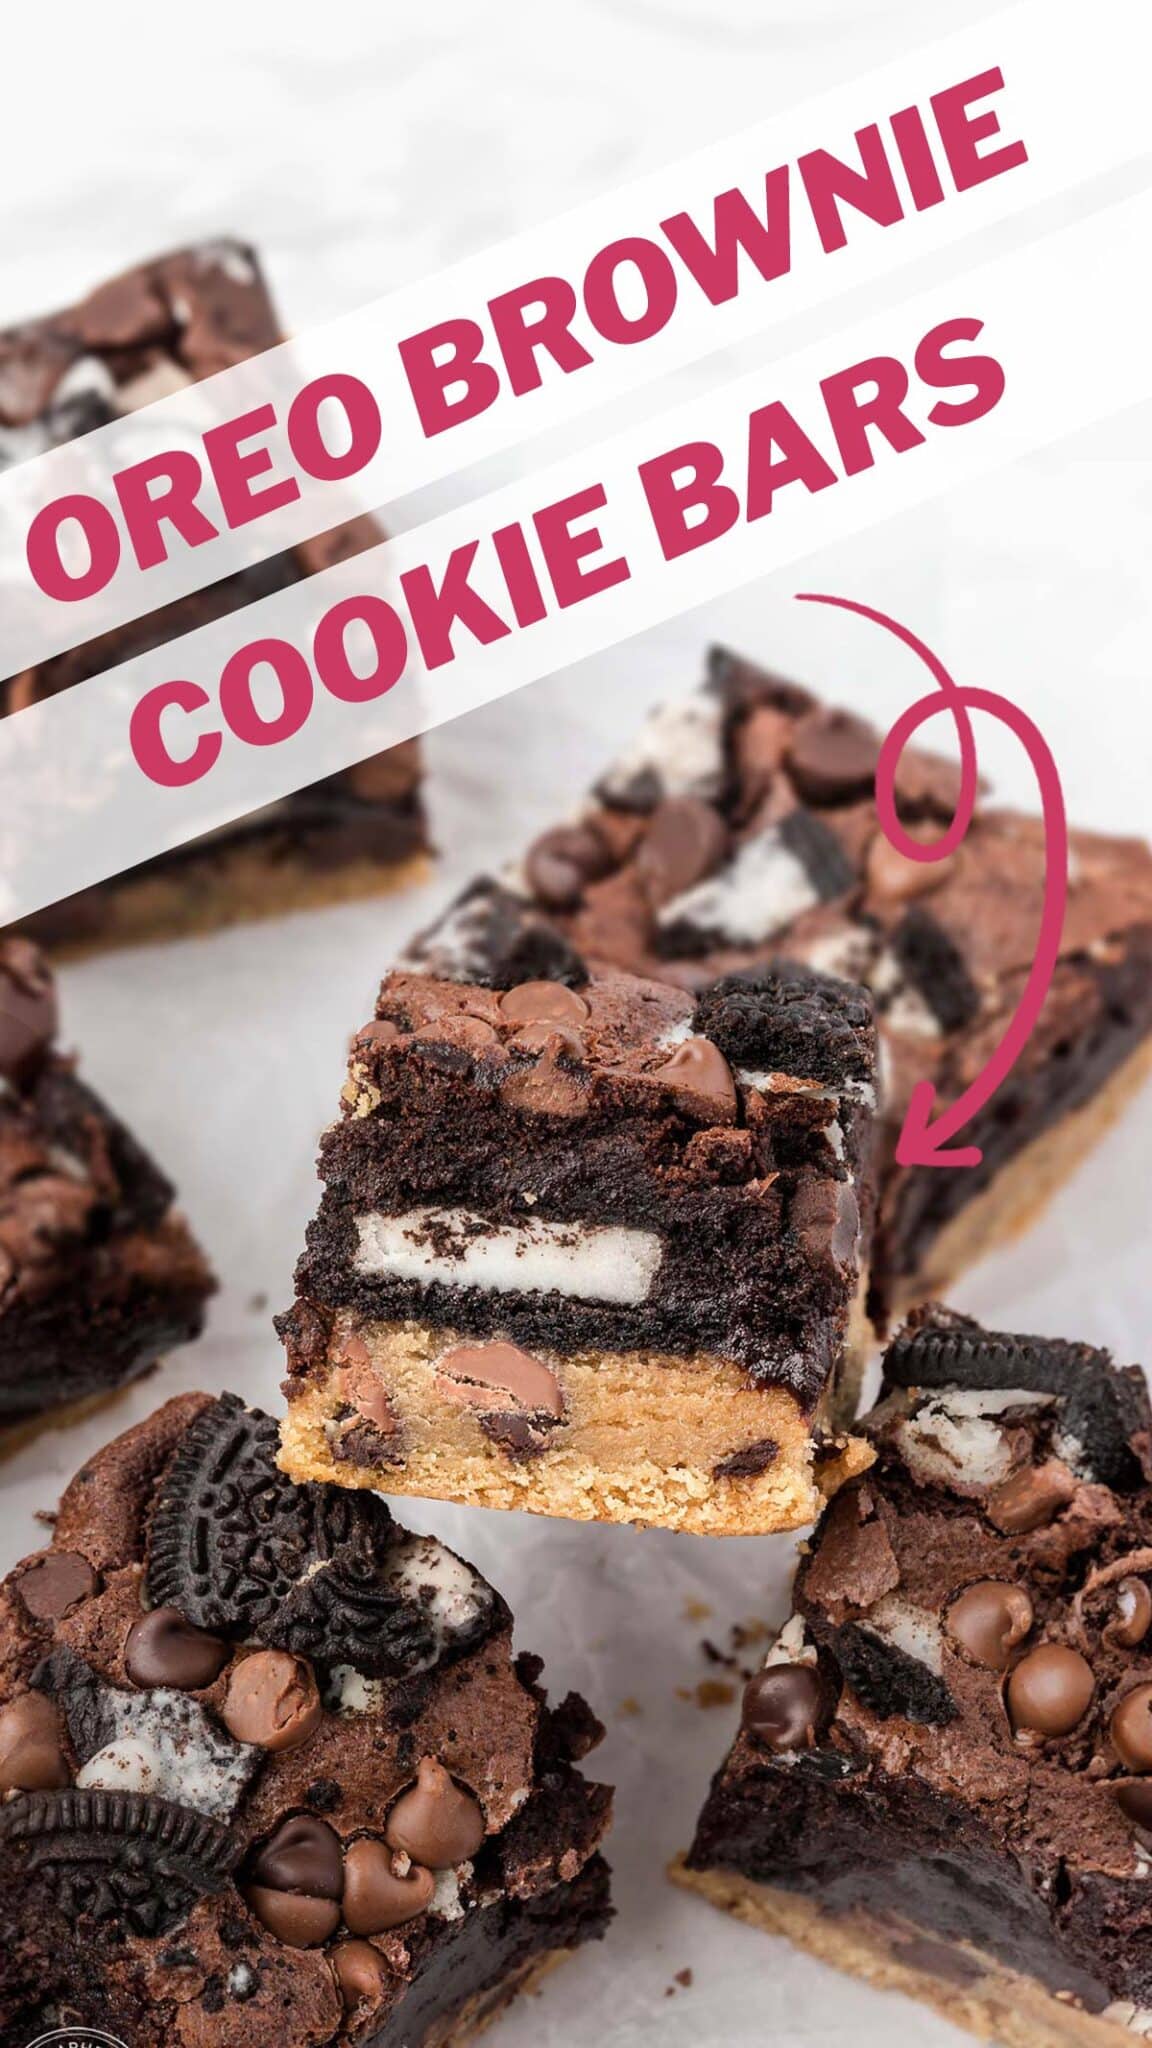 Picture of Oreo Brookies with text overlay for Pinterest.